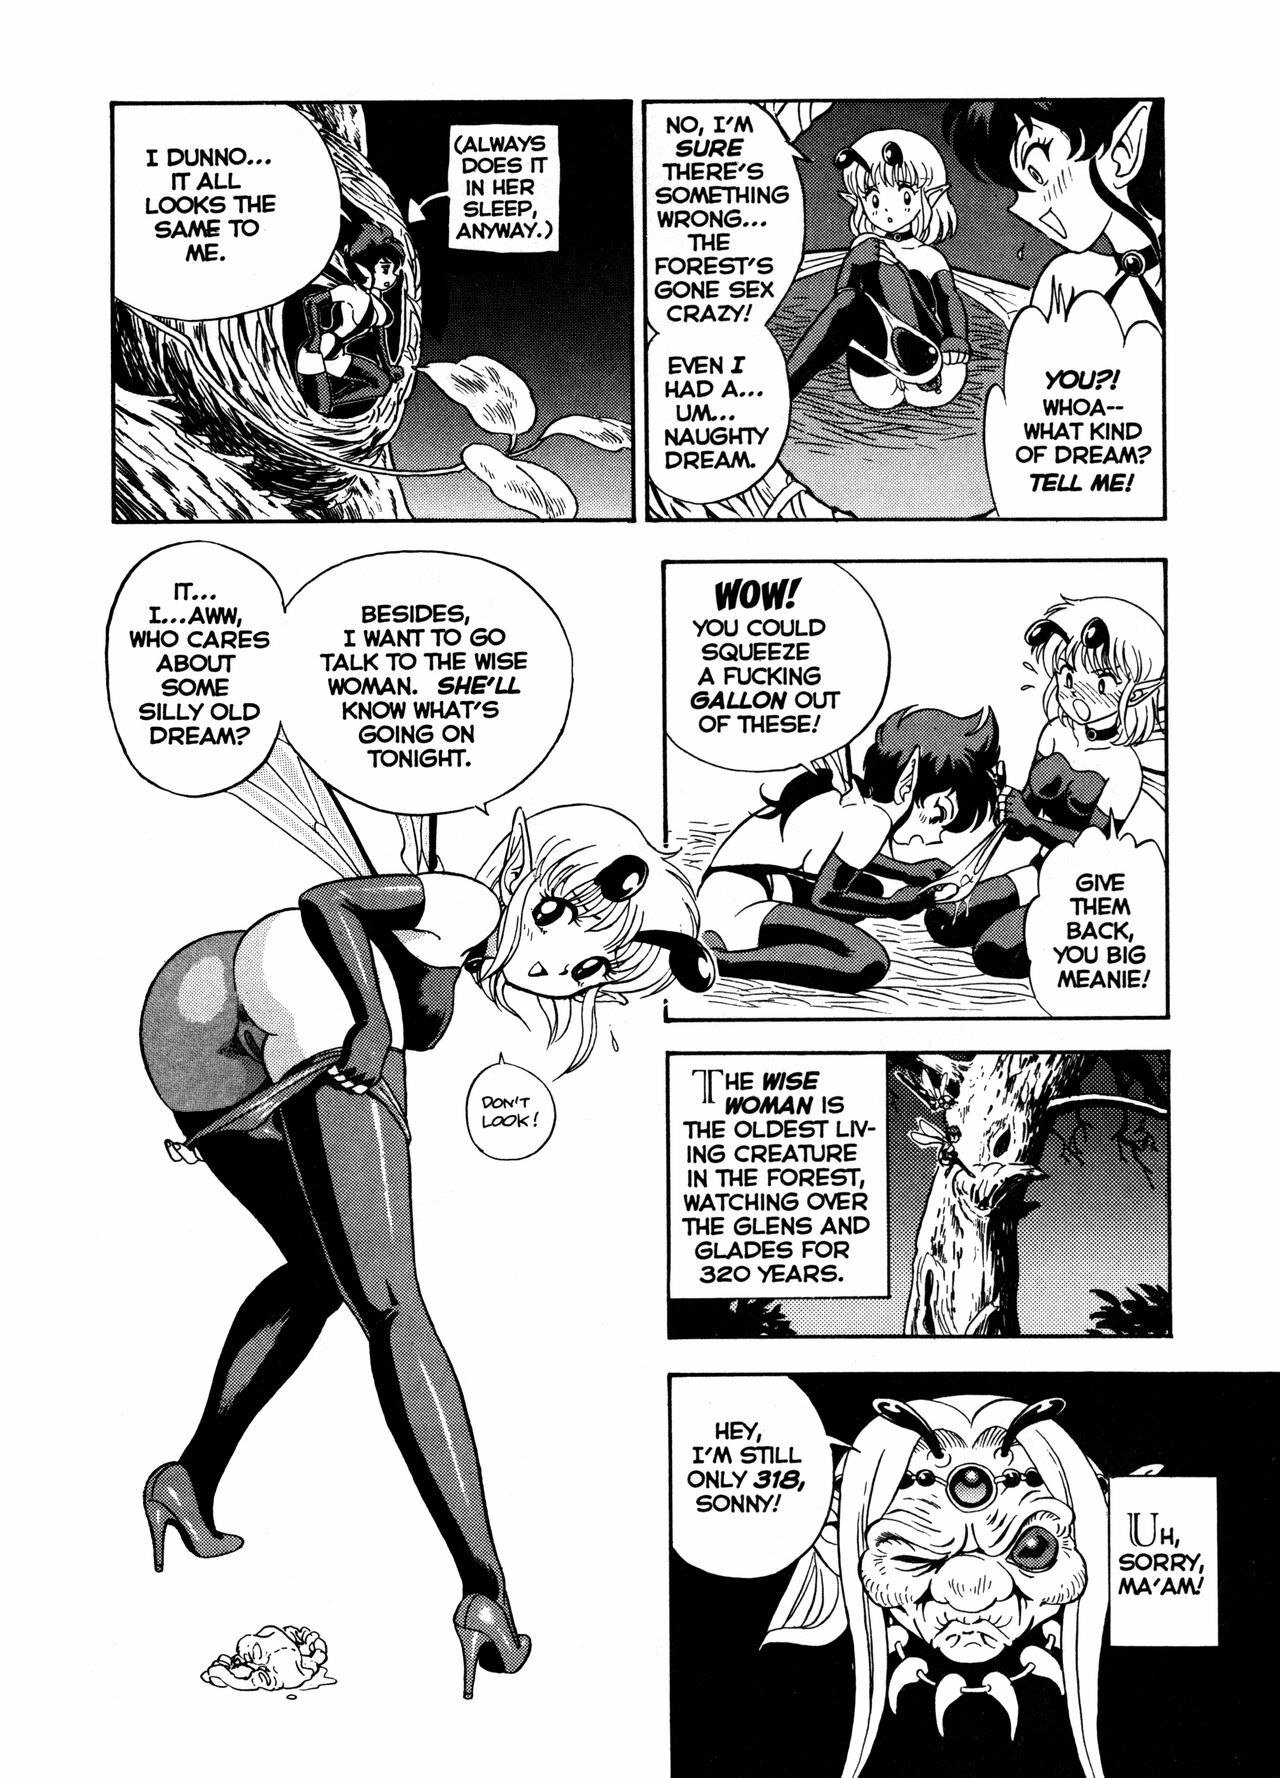 [Kondom] The New Bondage Fairies Issue 12 [ENG][Hi-Res] page 19 full